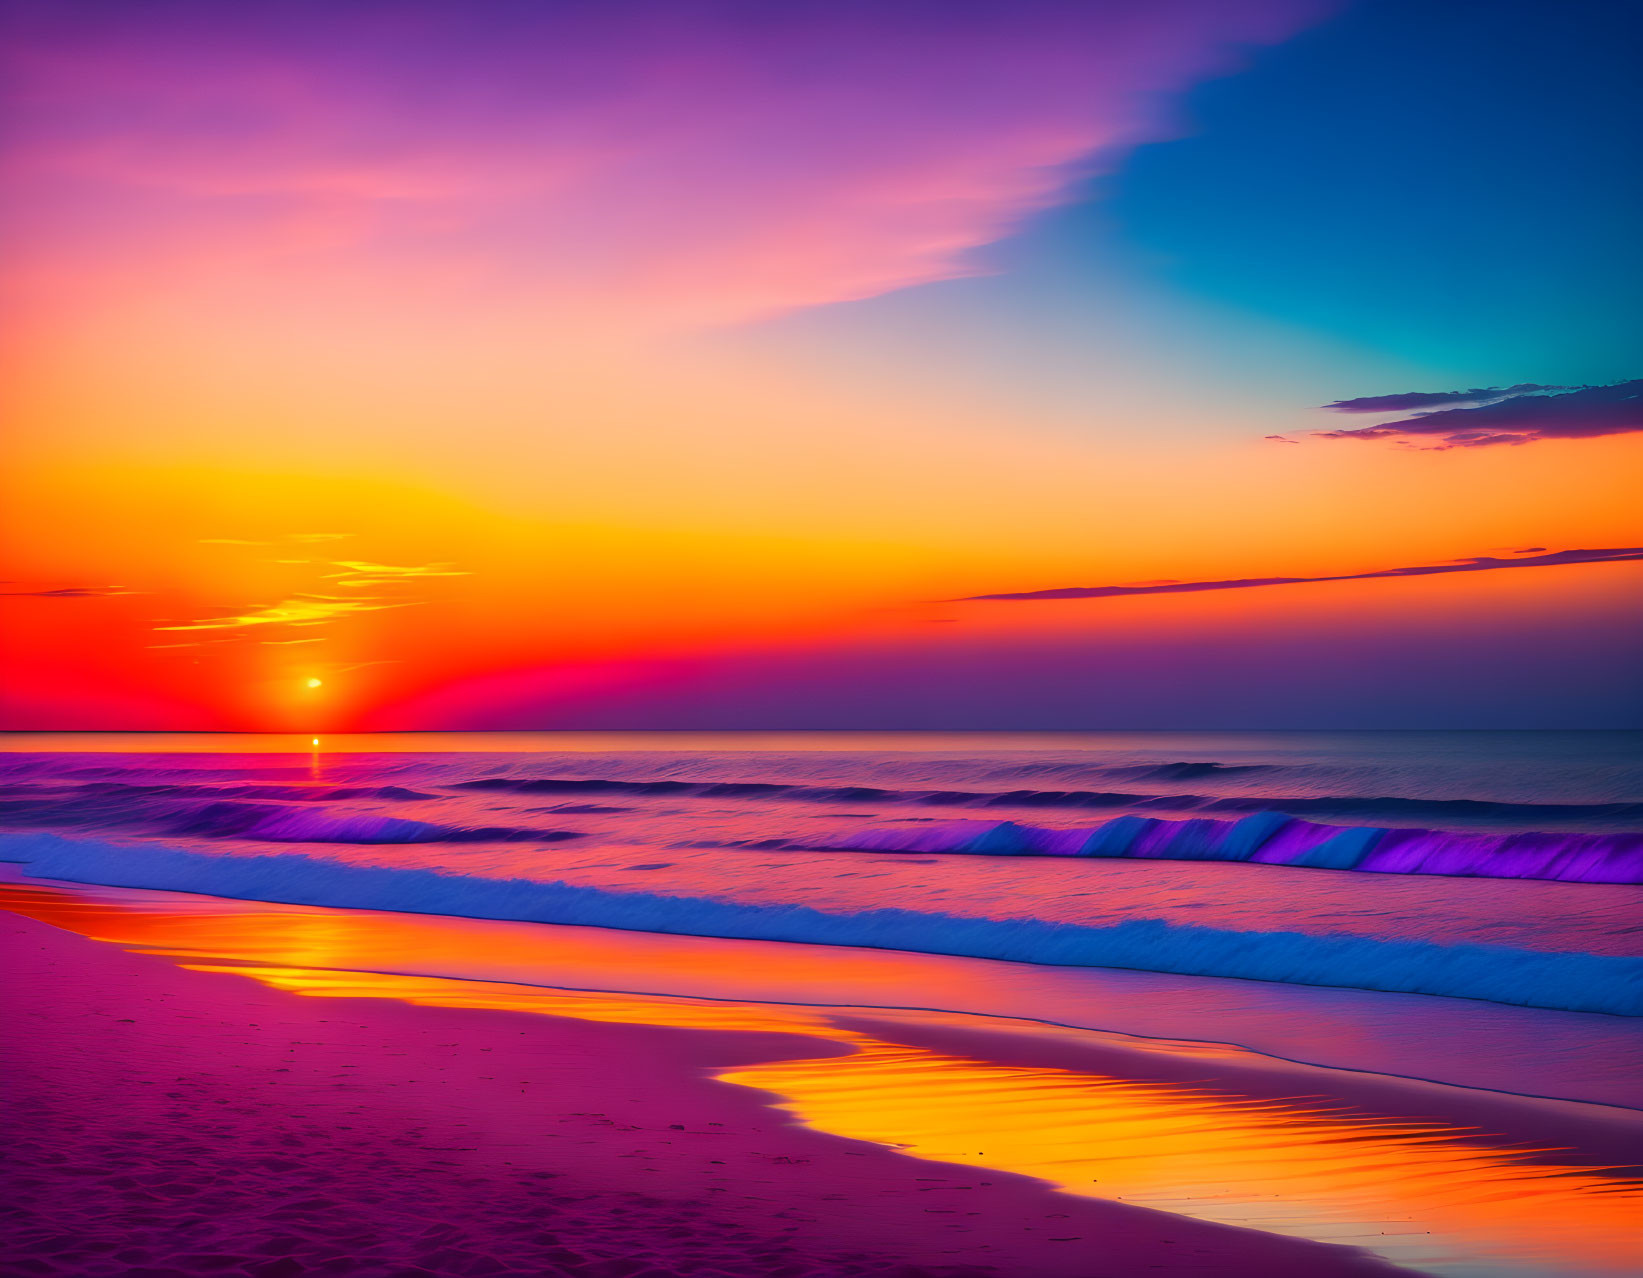 Colorful Beach Sunset with Purple, Pink, and Orange Hues